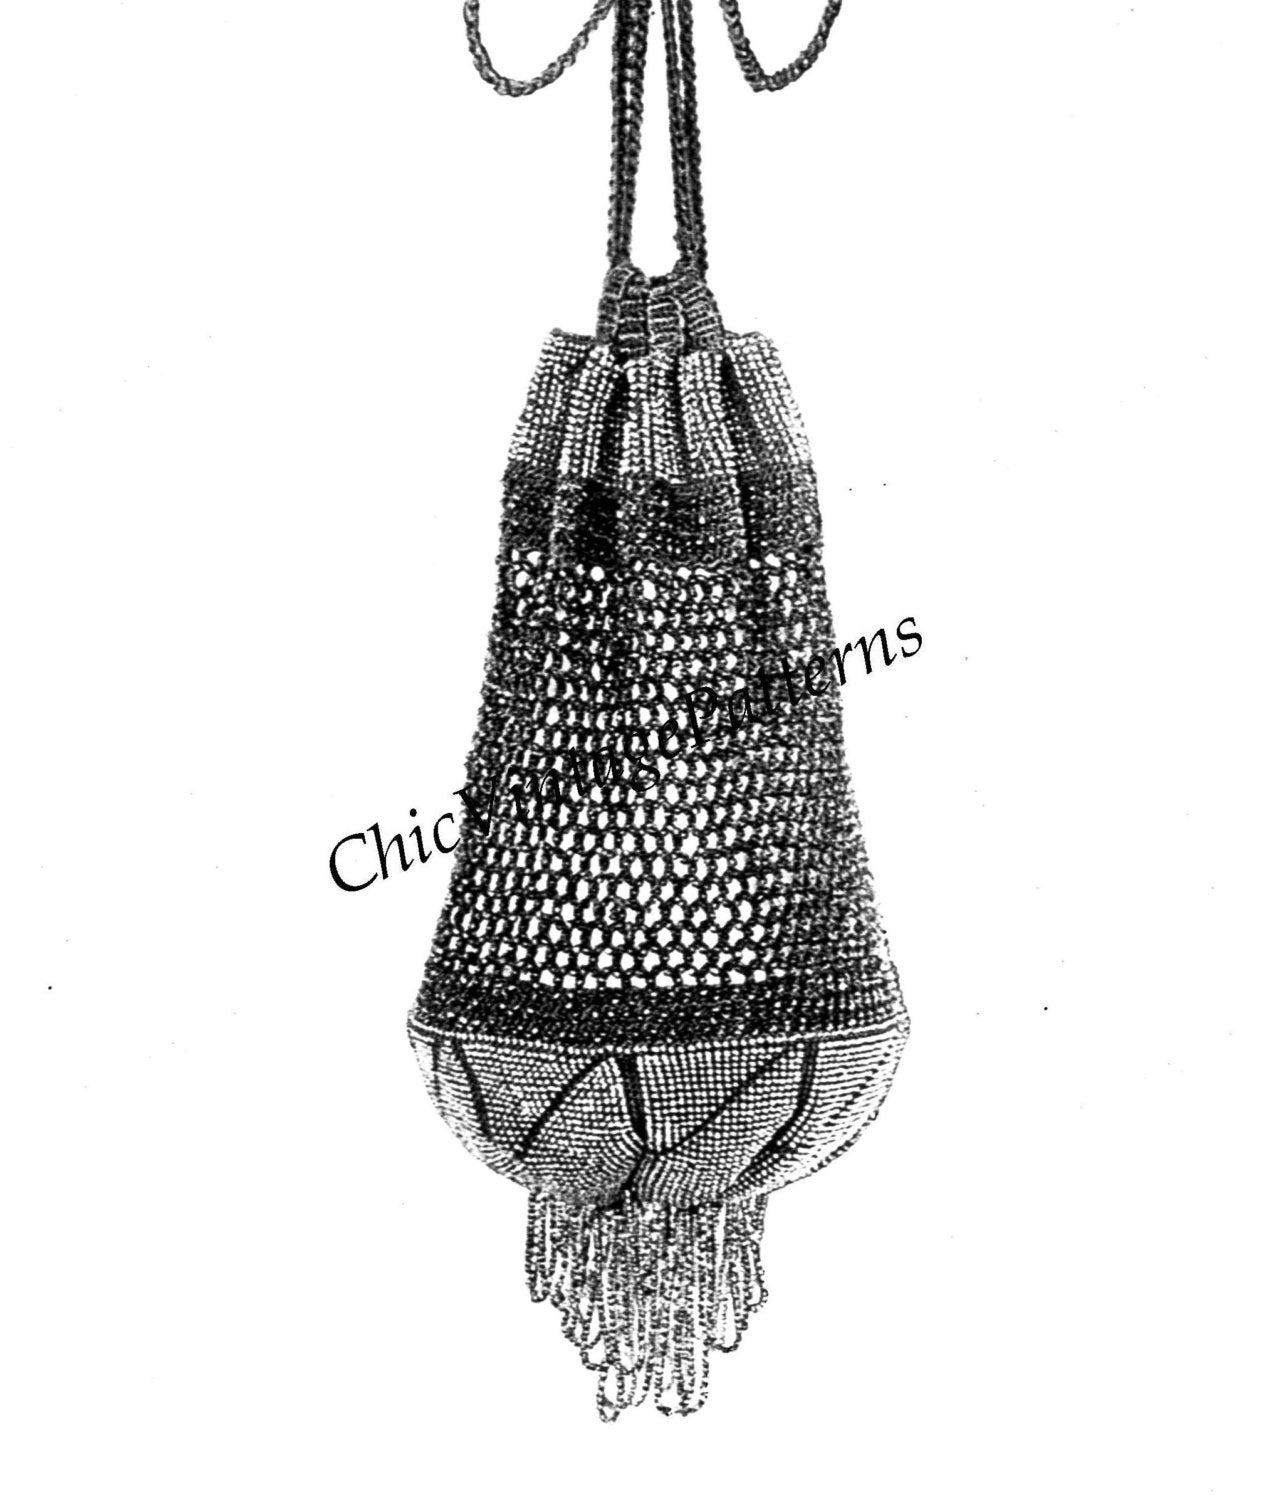 Beaded Crochet Bag Pattern, 1920's Ladies Fashion, Instant Download